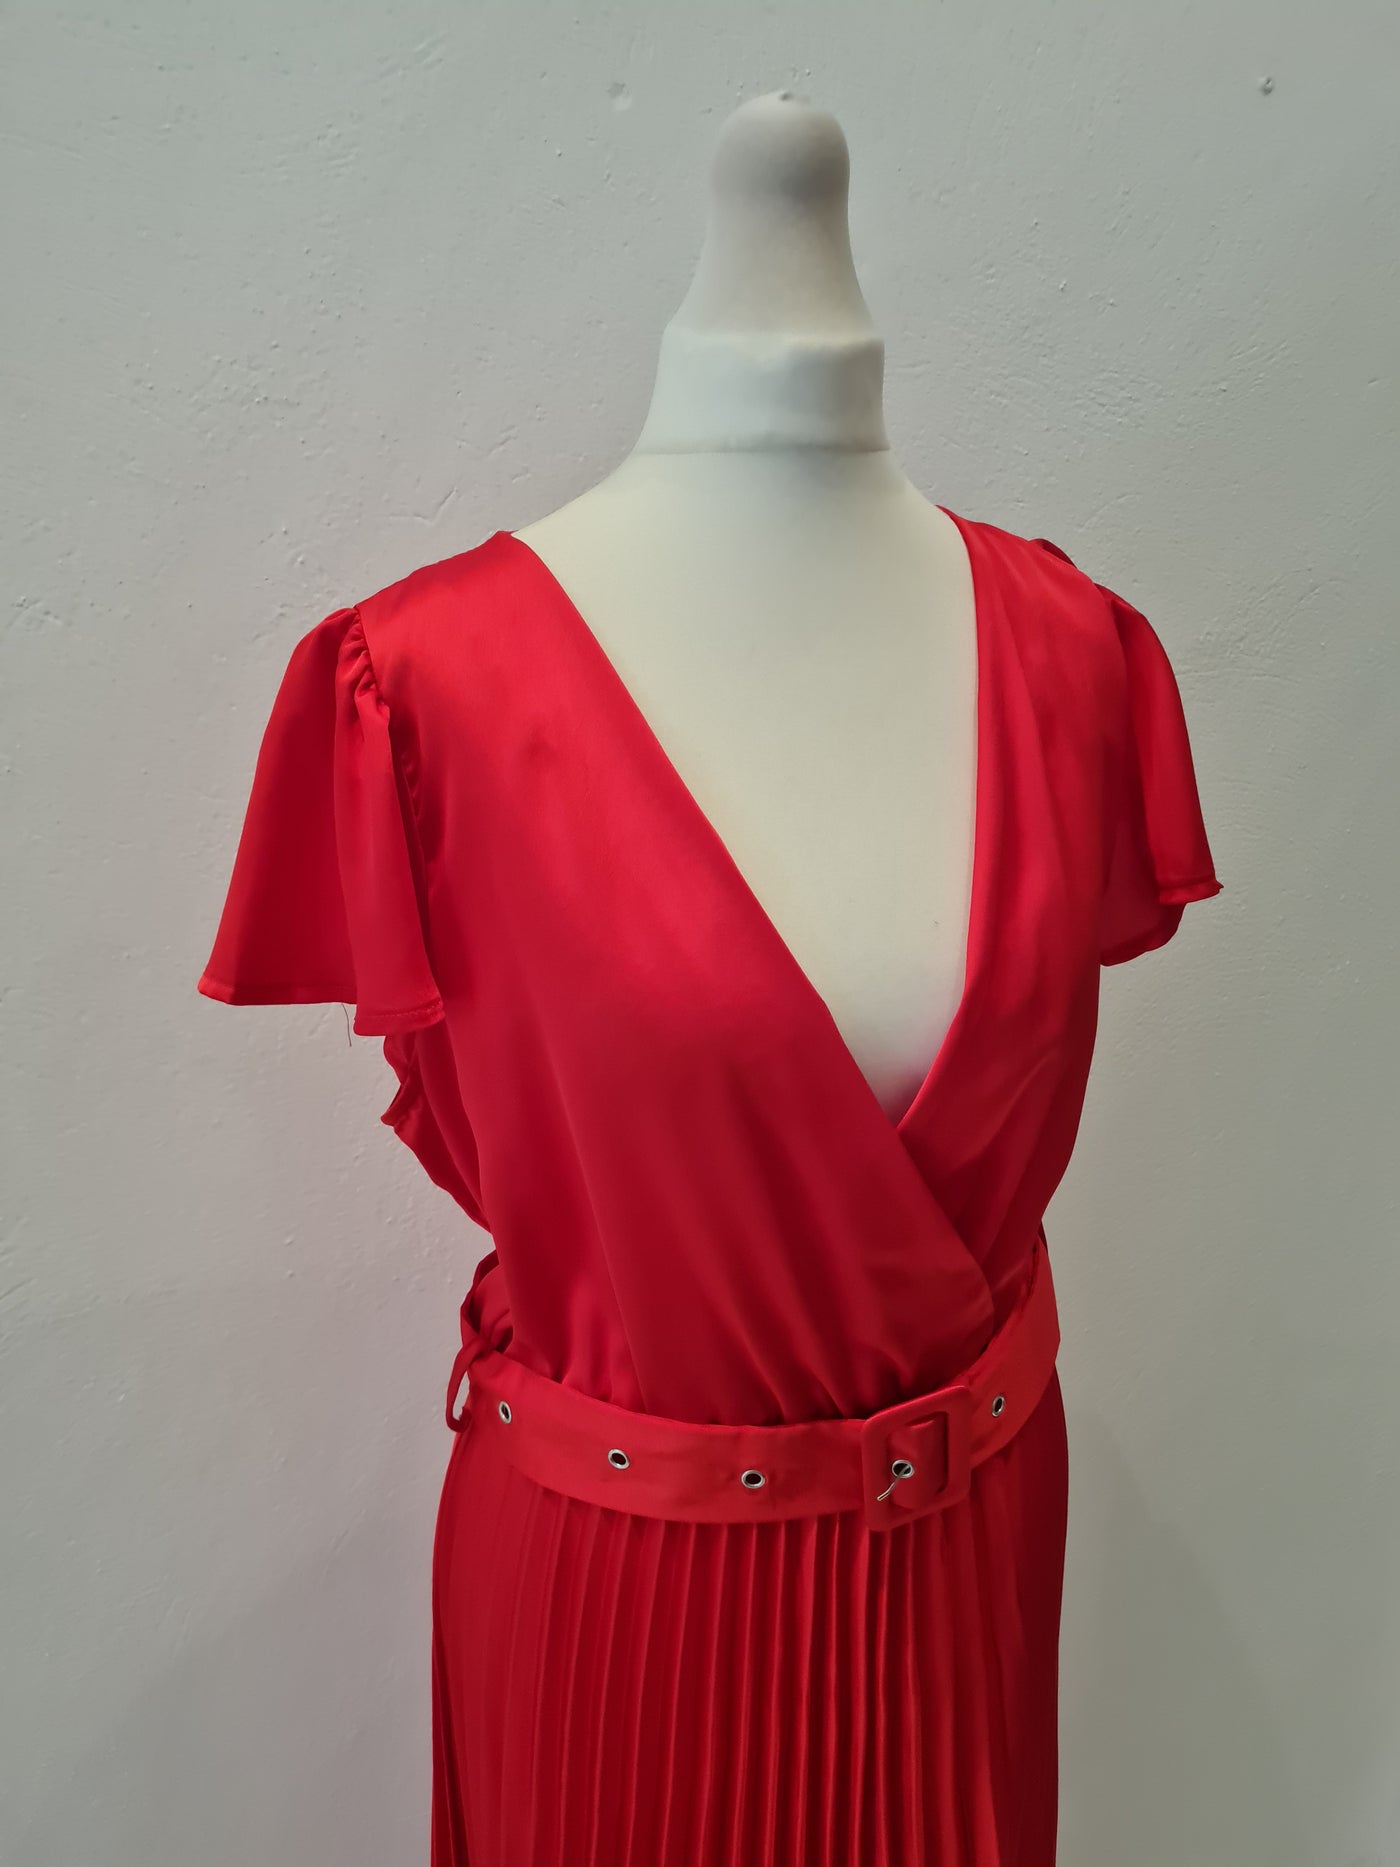 New Look Red Pleat Dress 8 NEW RRP £28